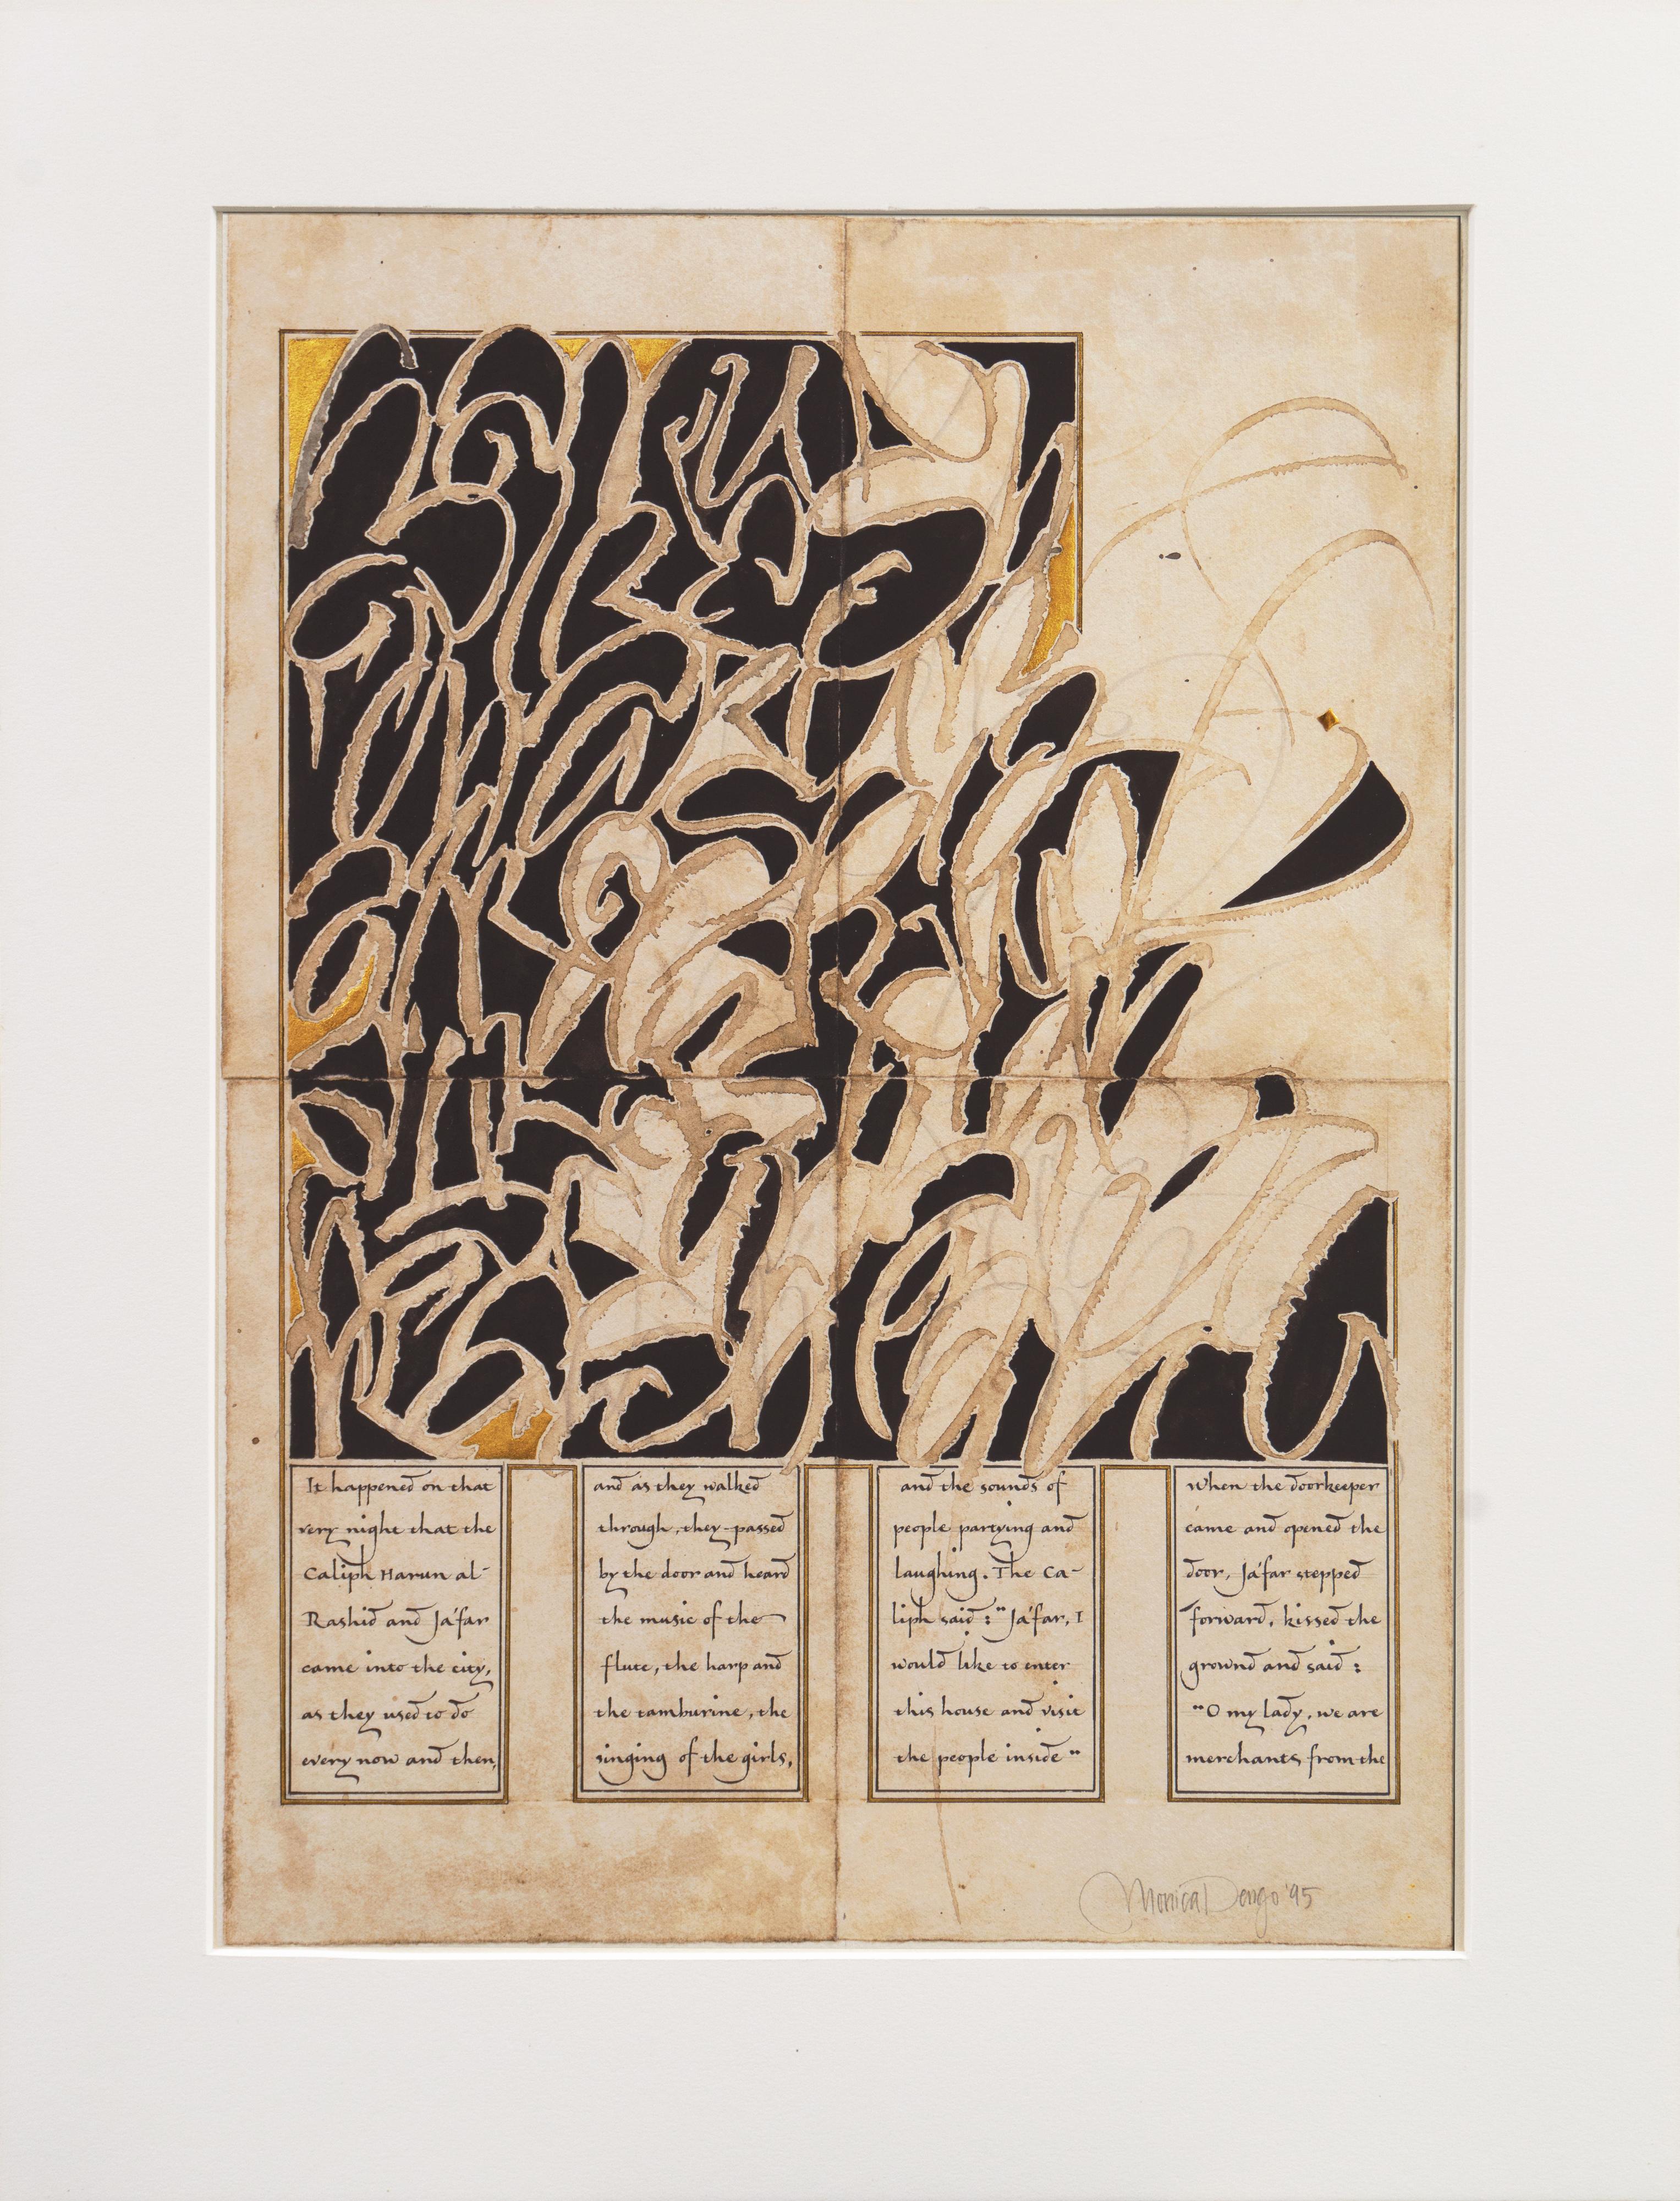 'The Caliph Harum al Rashid', Woman Artist, Modernist Abstract with Calligraphy For Sale 2